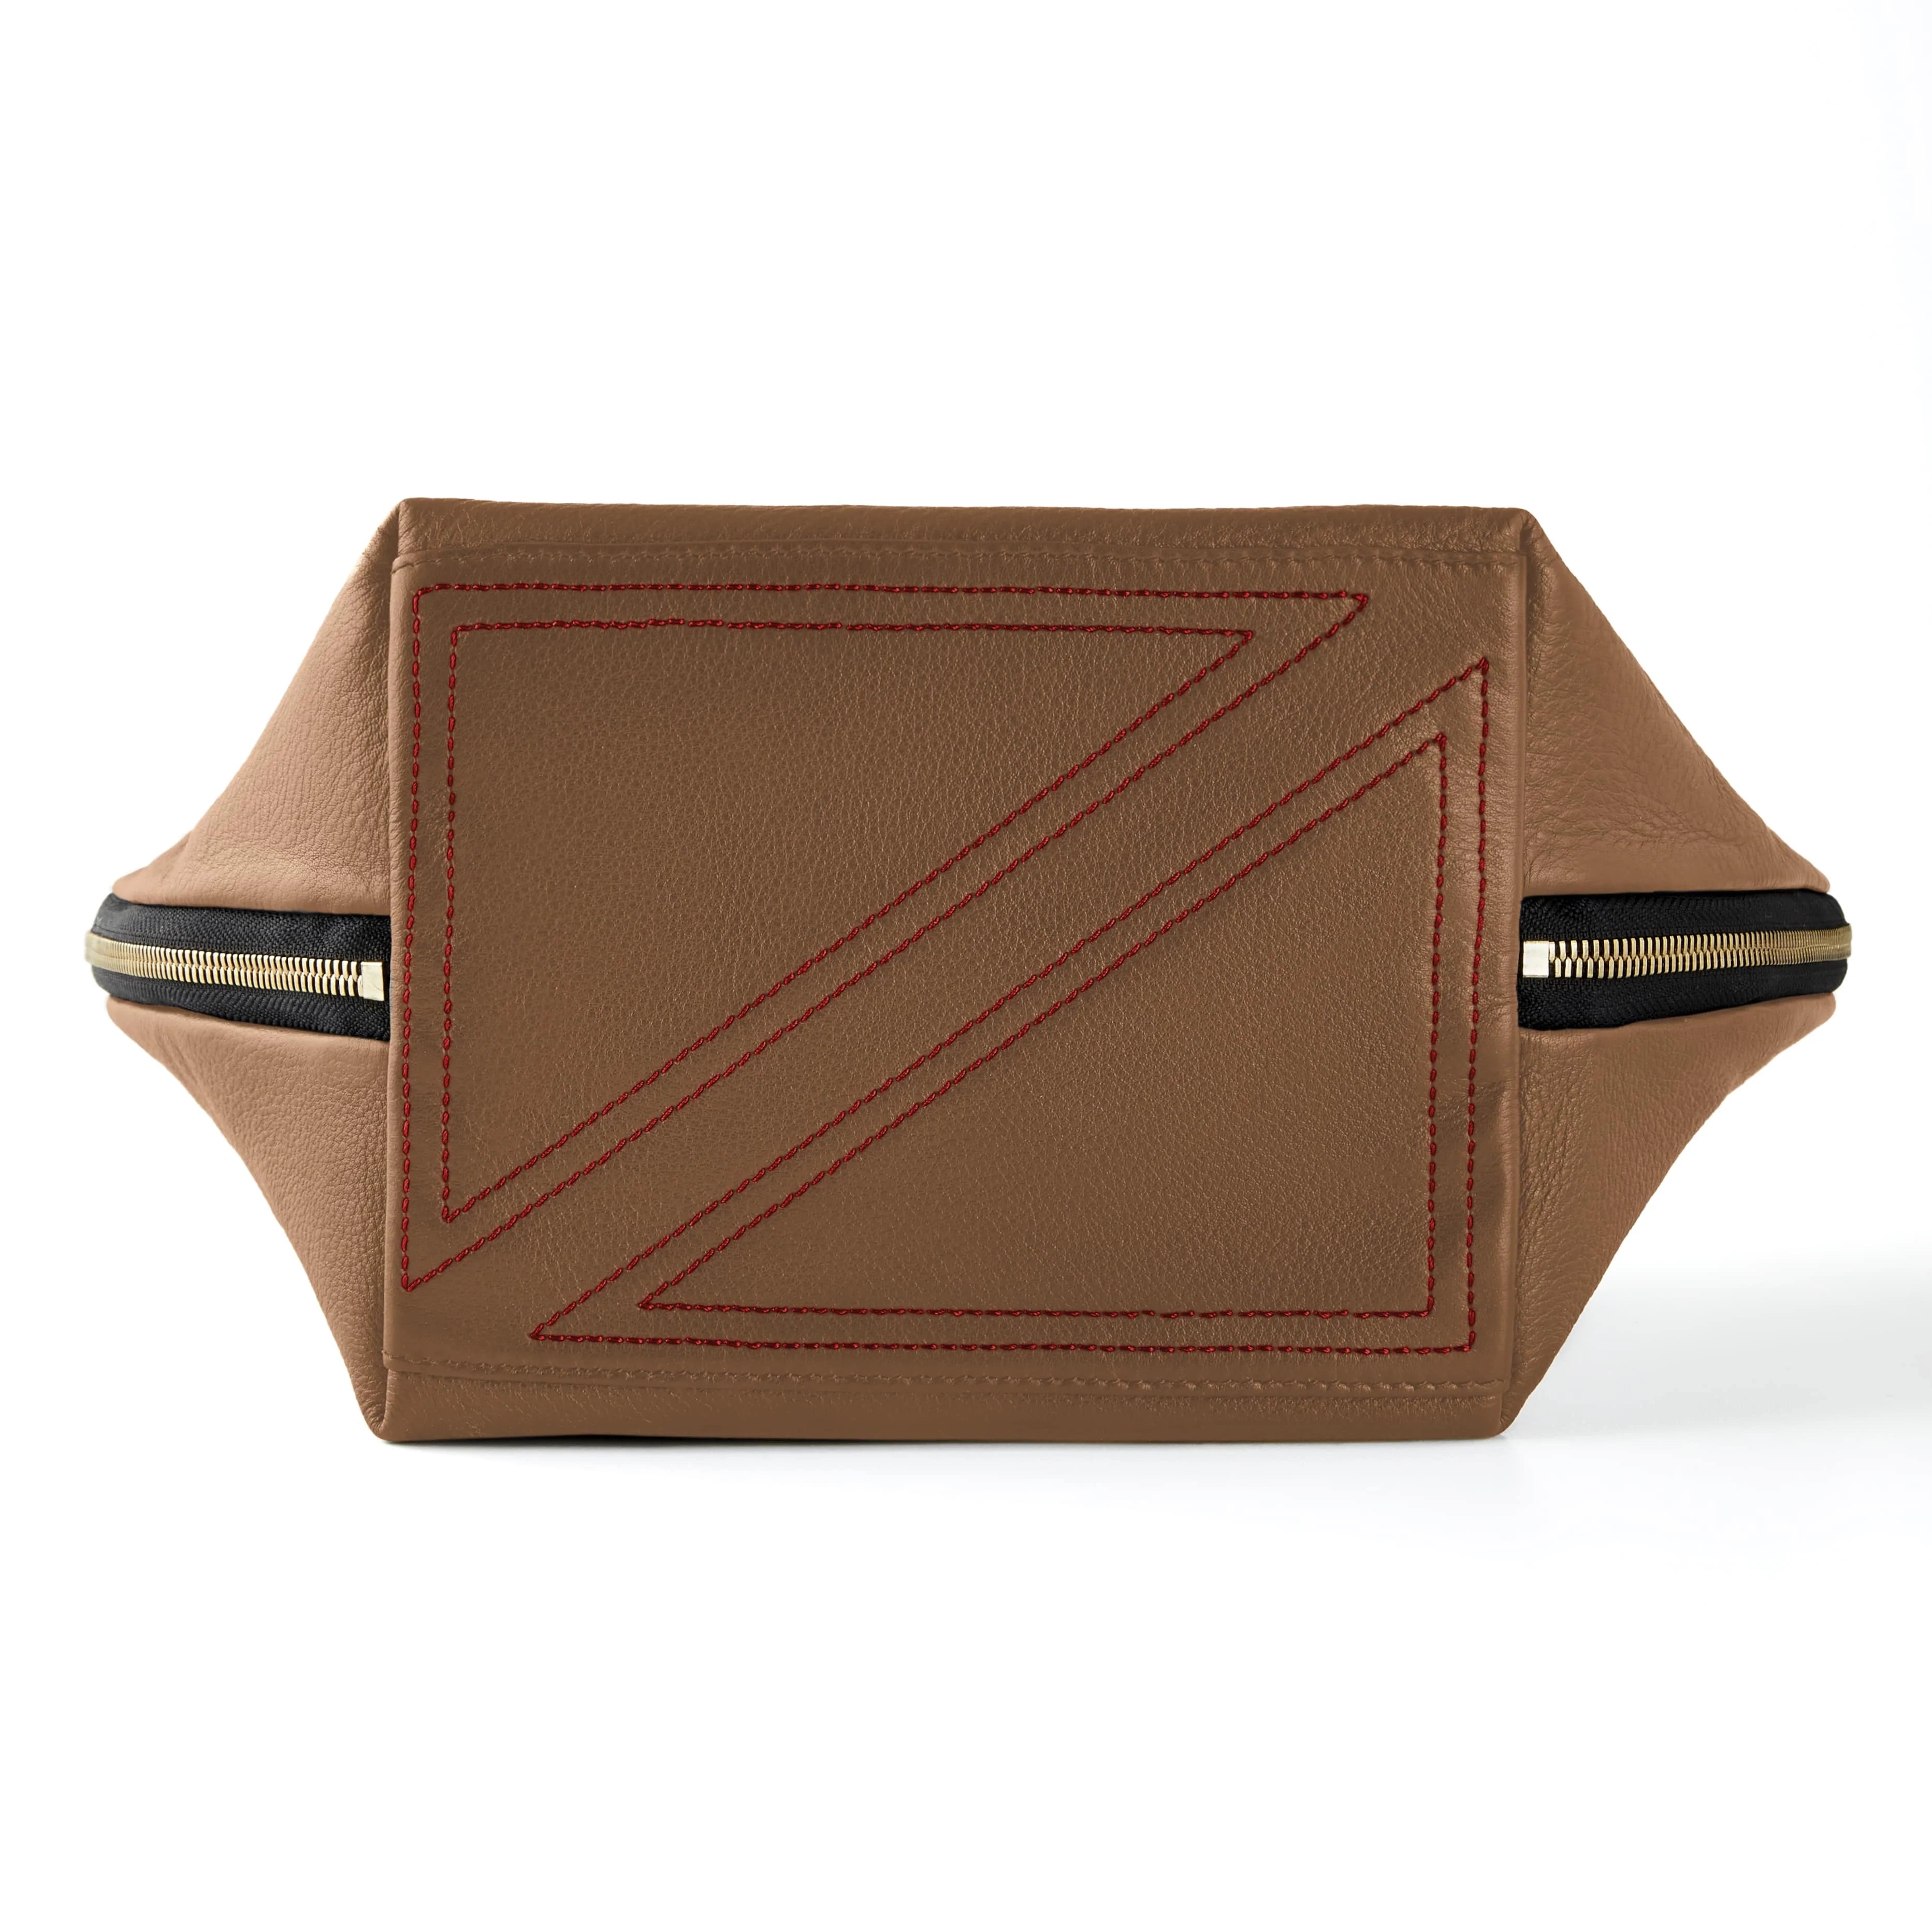 KUSSHI Vacationer Makeup Bag Leather Camel with Red Interior